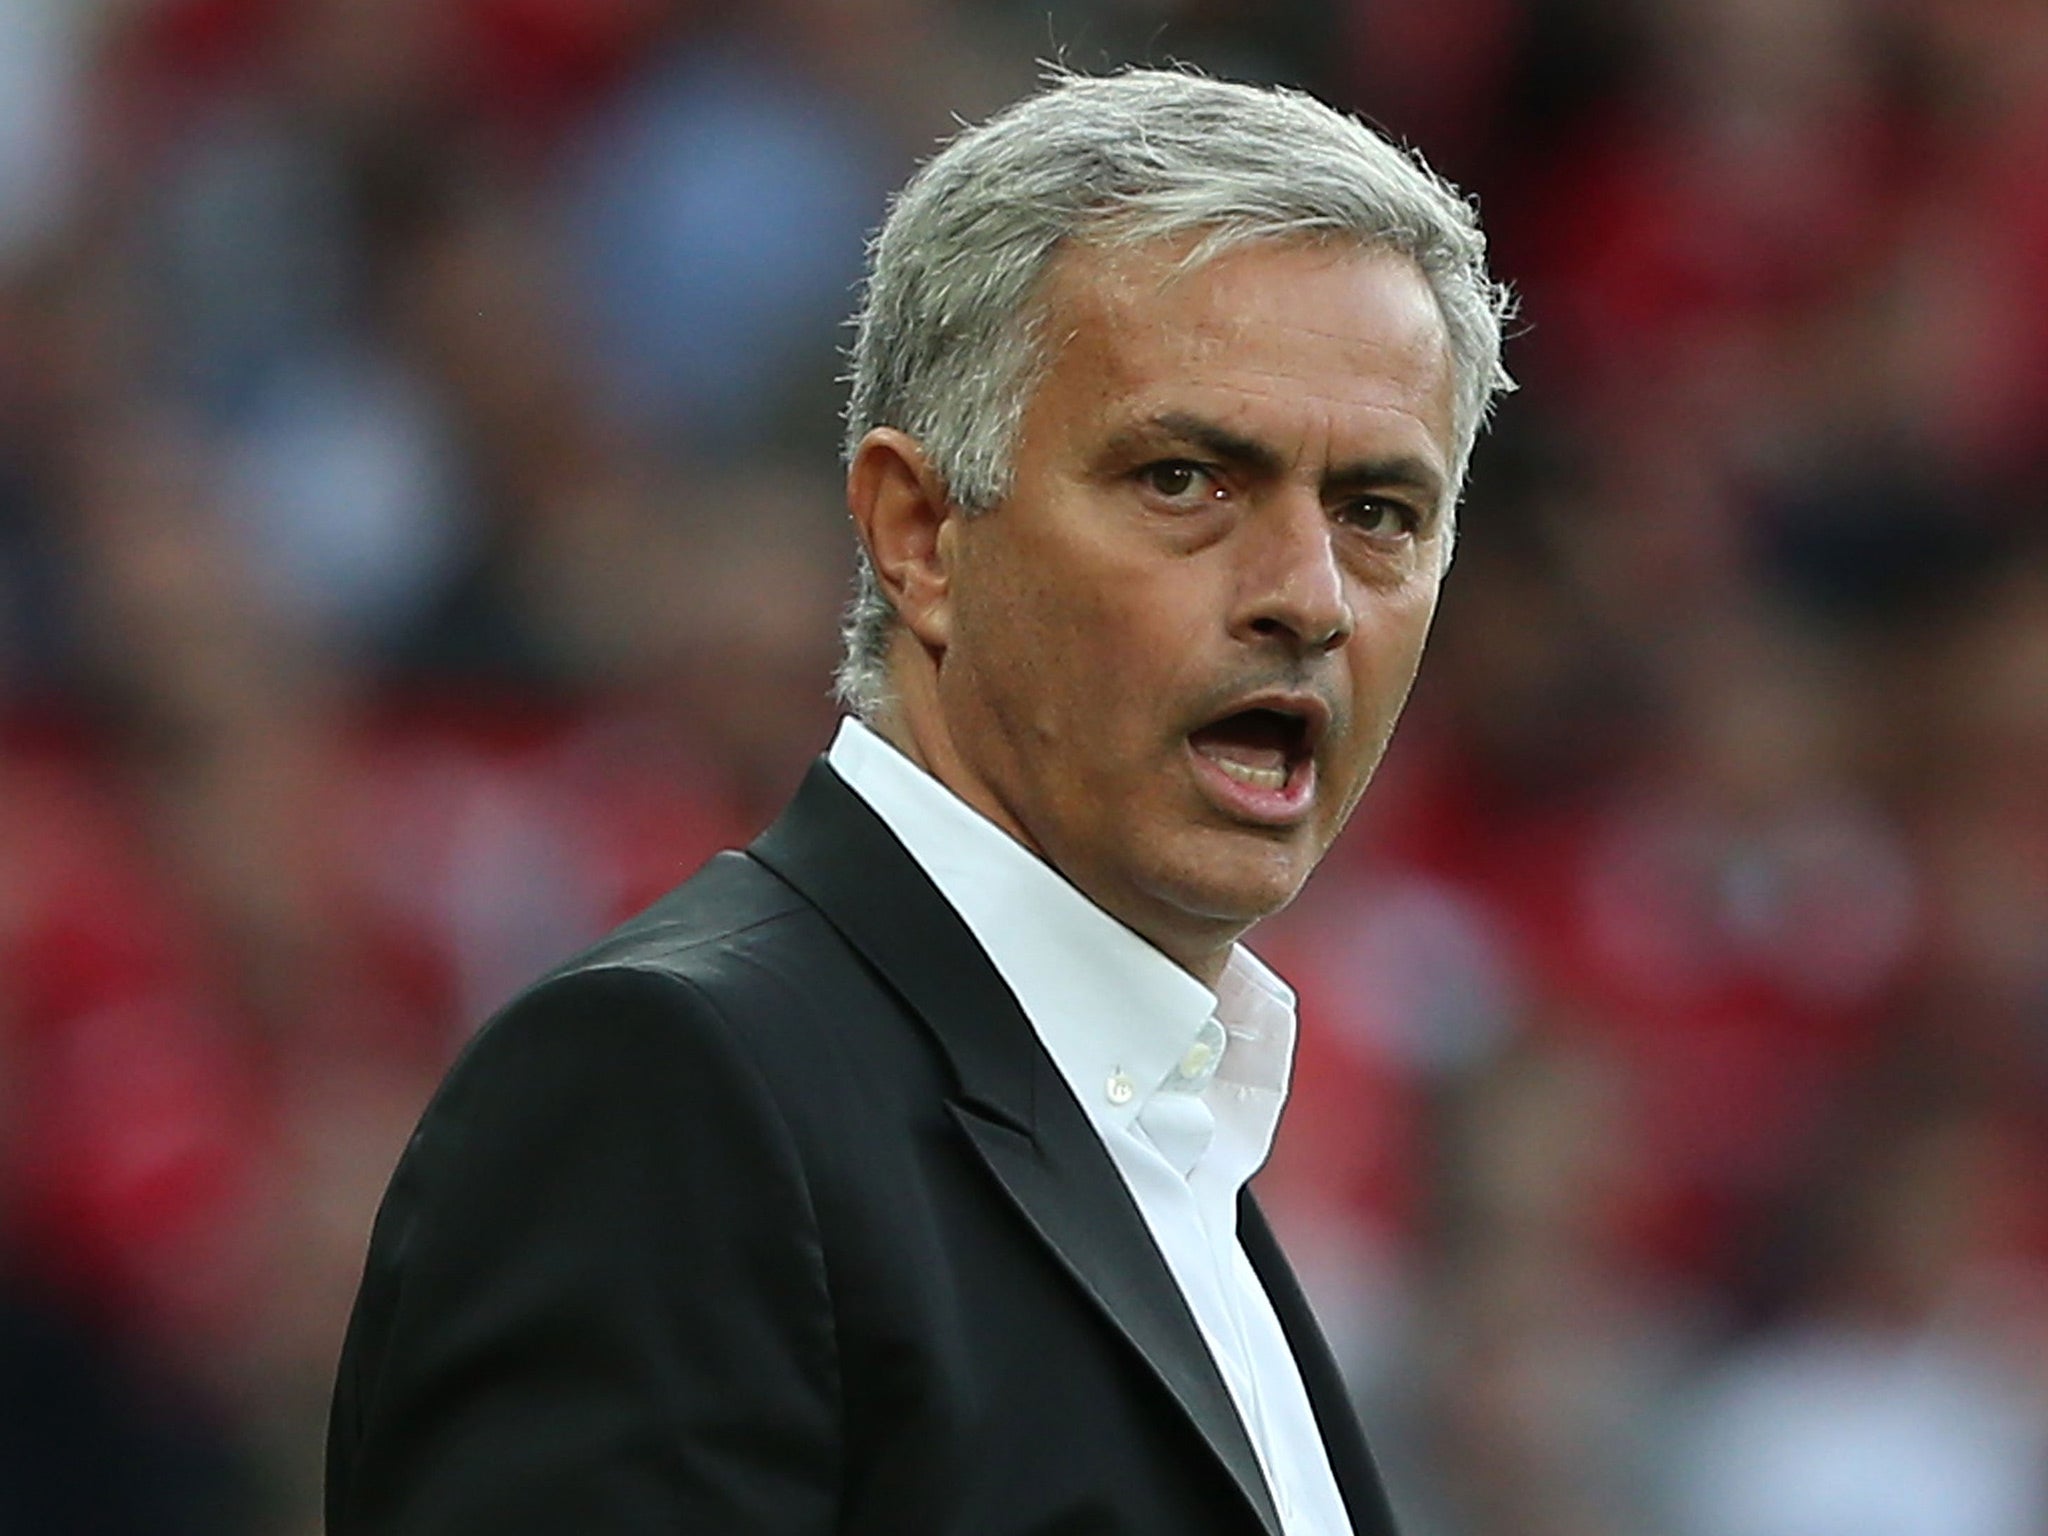 Mourinho started the summer wanting four signings